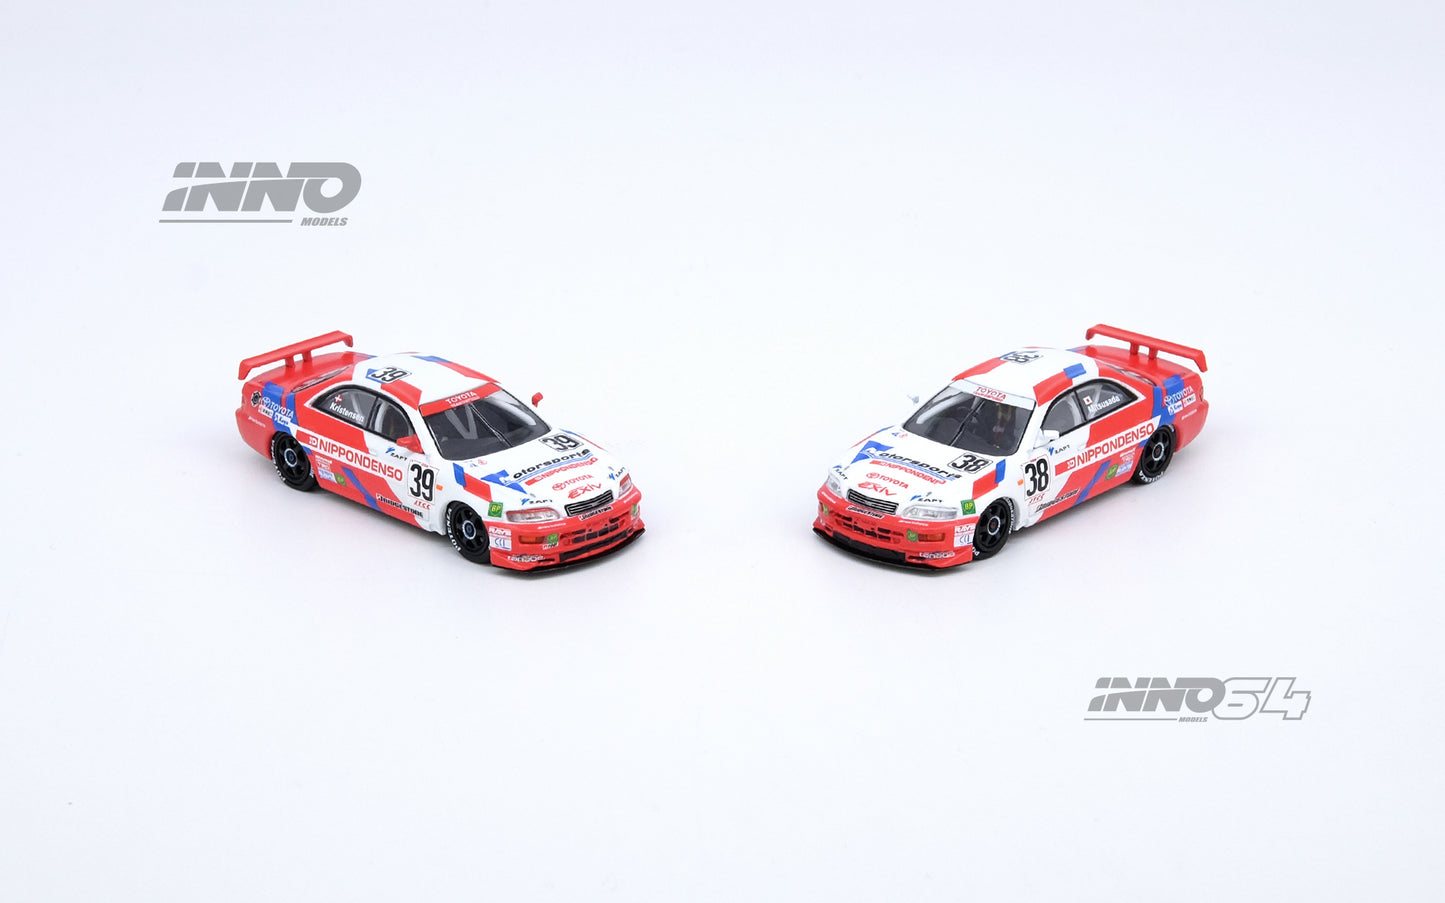 Inno64 1/64 TOYOTA CORONA EXIV #38 & #39 "TOYOTA TEAM CERUMO" JTCC 1995 Box Set Collection (2 Cars And Special Hard Box included)